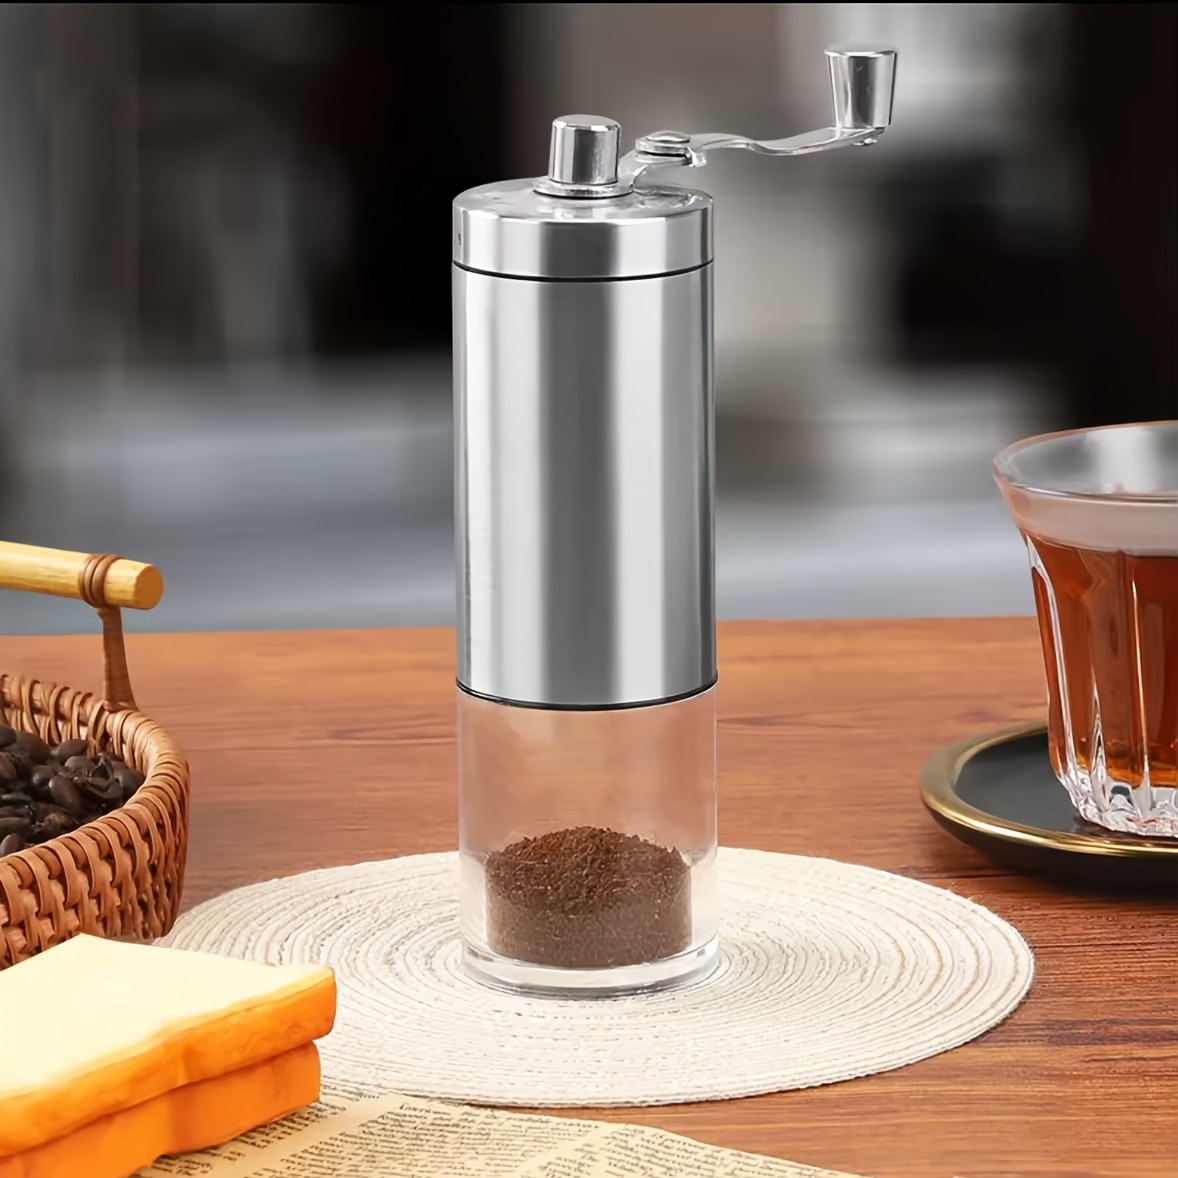 

Manual Stainless Steel Coffee Grinder - Adjustable Settings, Portable Conical Burr Grinder For Camping, Travel, Espresso - With Hand Crank